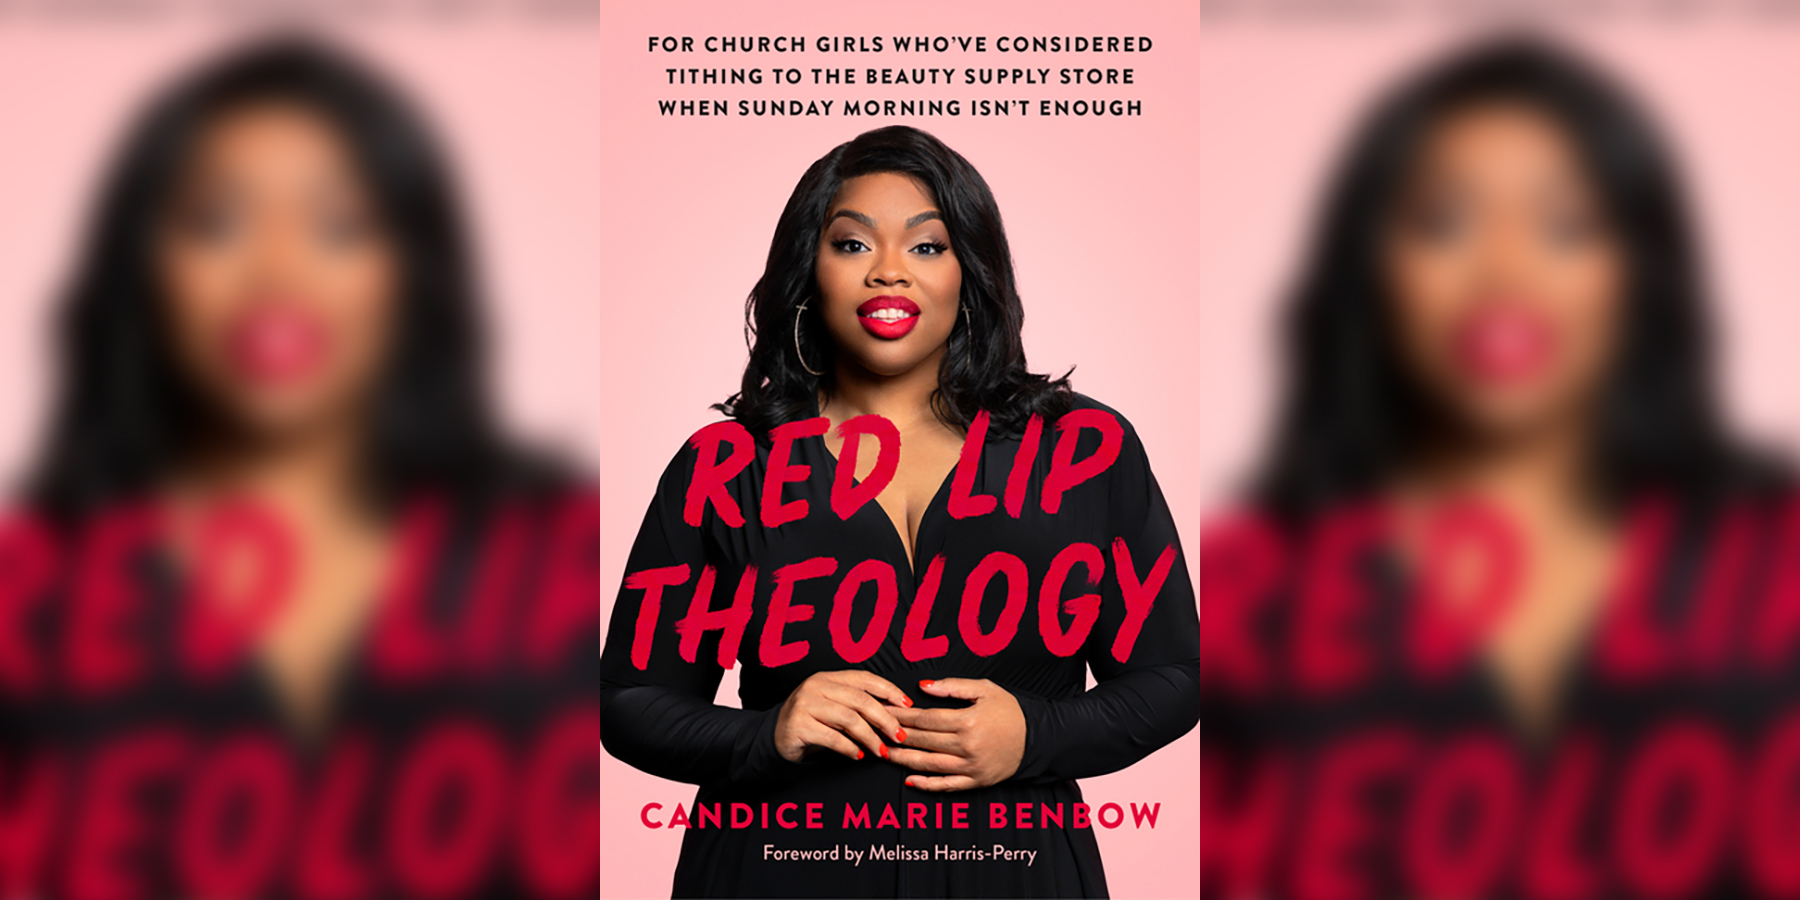 Red Lip Theology: For Church Girls Who’ve Considered Tithing to the Beauty Supply Store When Sunday Morning Isn’t Enough